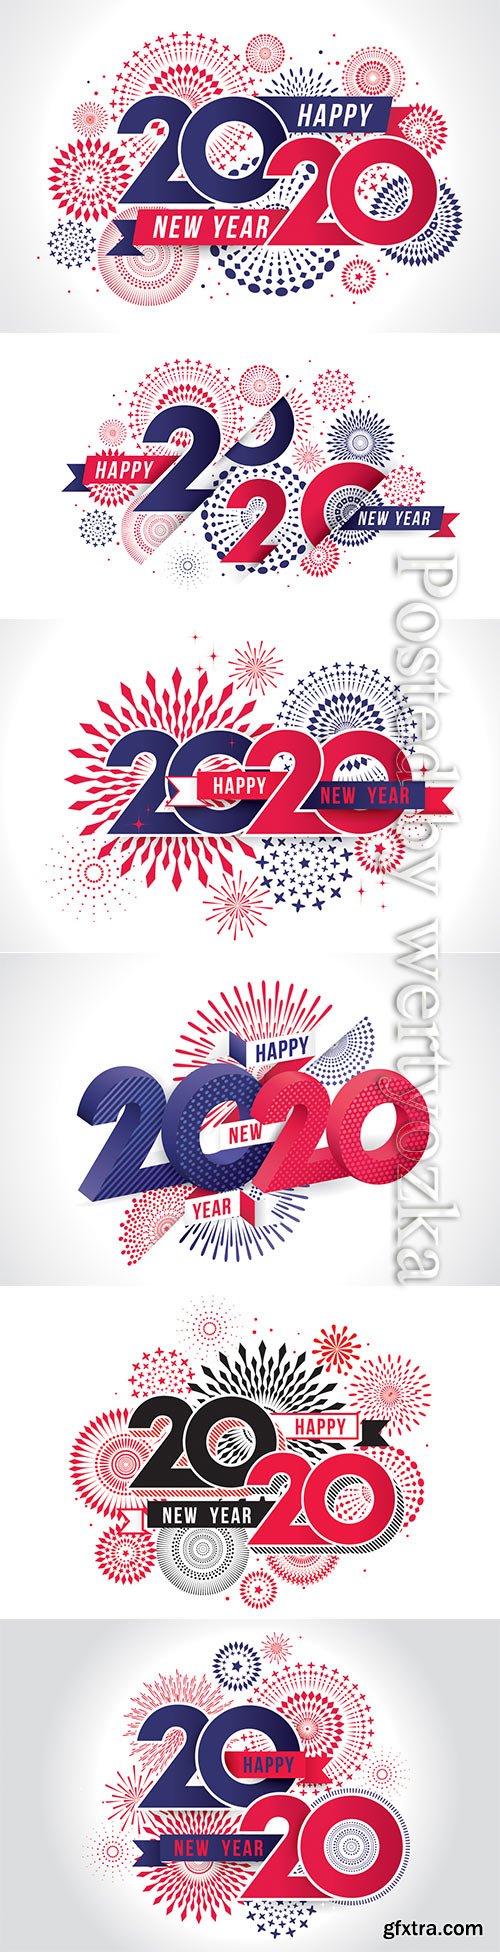 Happy new year 2020 vector illustration of fireworks